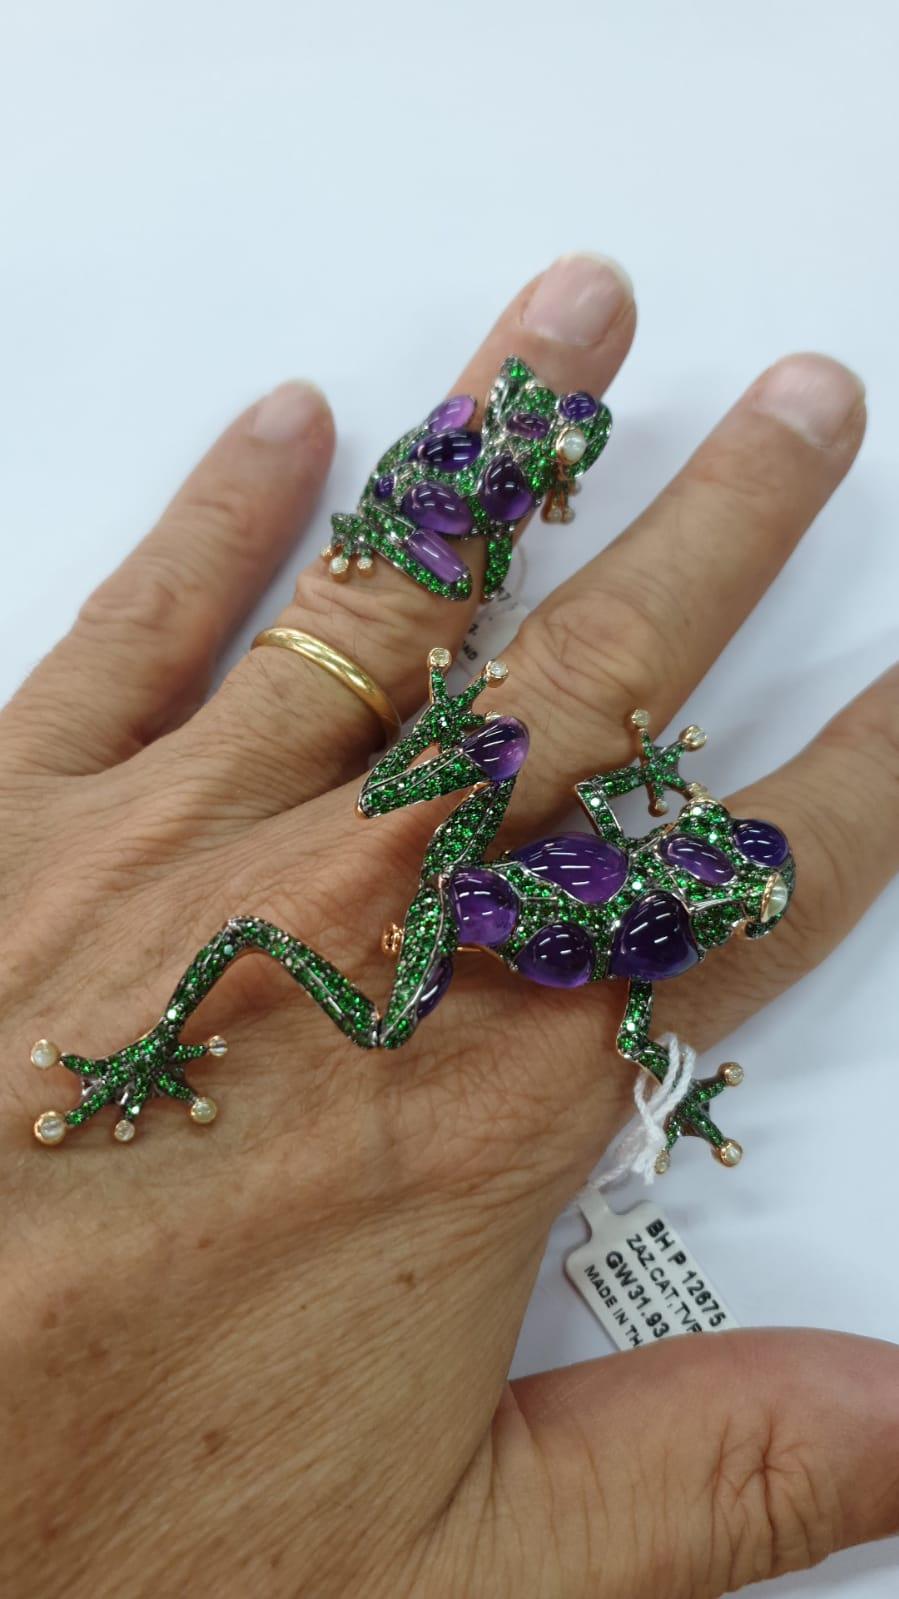 18K Gold Brooch

Tsavorite 4,47 ct 
Amethyst 14,85 ct
Catseye 1,47 ct

Total weight - 36,08 grams 

Matching Ring Available 
When it comes to jewellery, frogs are most definitely lucky charms. The frog is a Native American symbol of wealth and